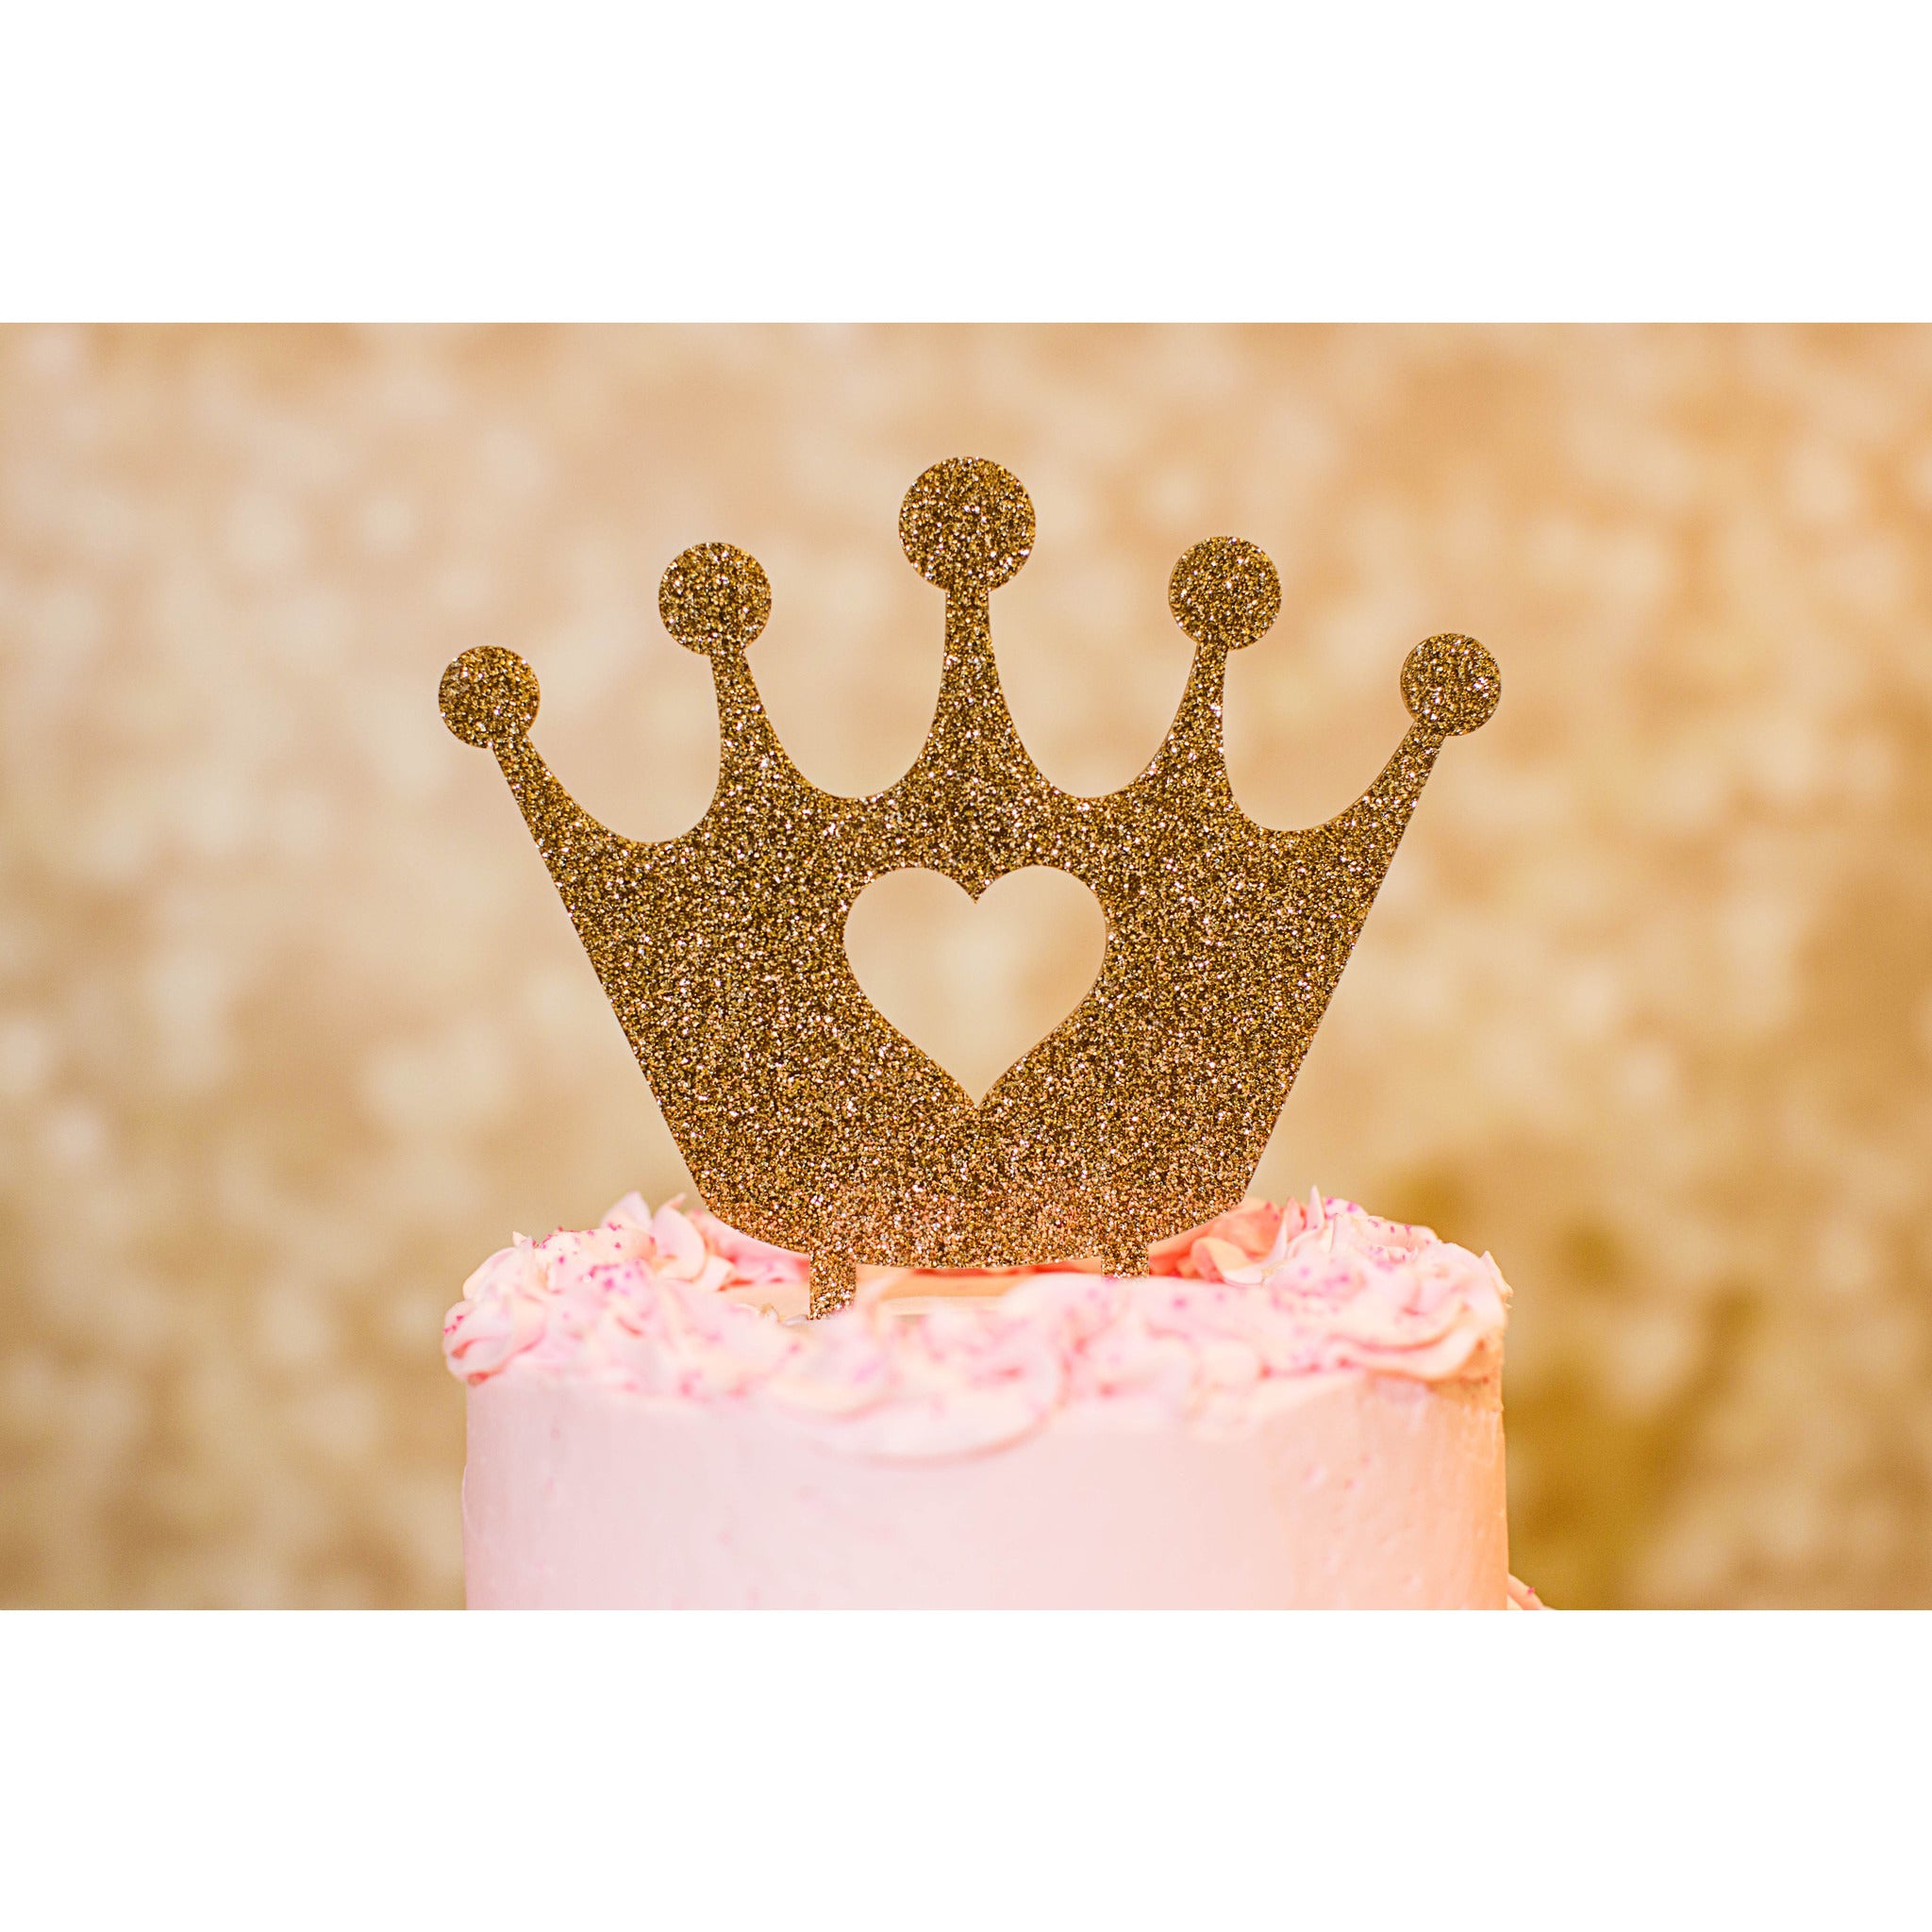 Magical Princess Cake Toppers 7ct | The Party Darling